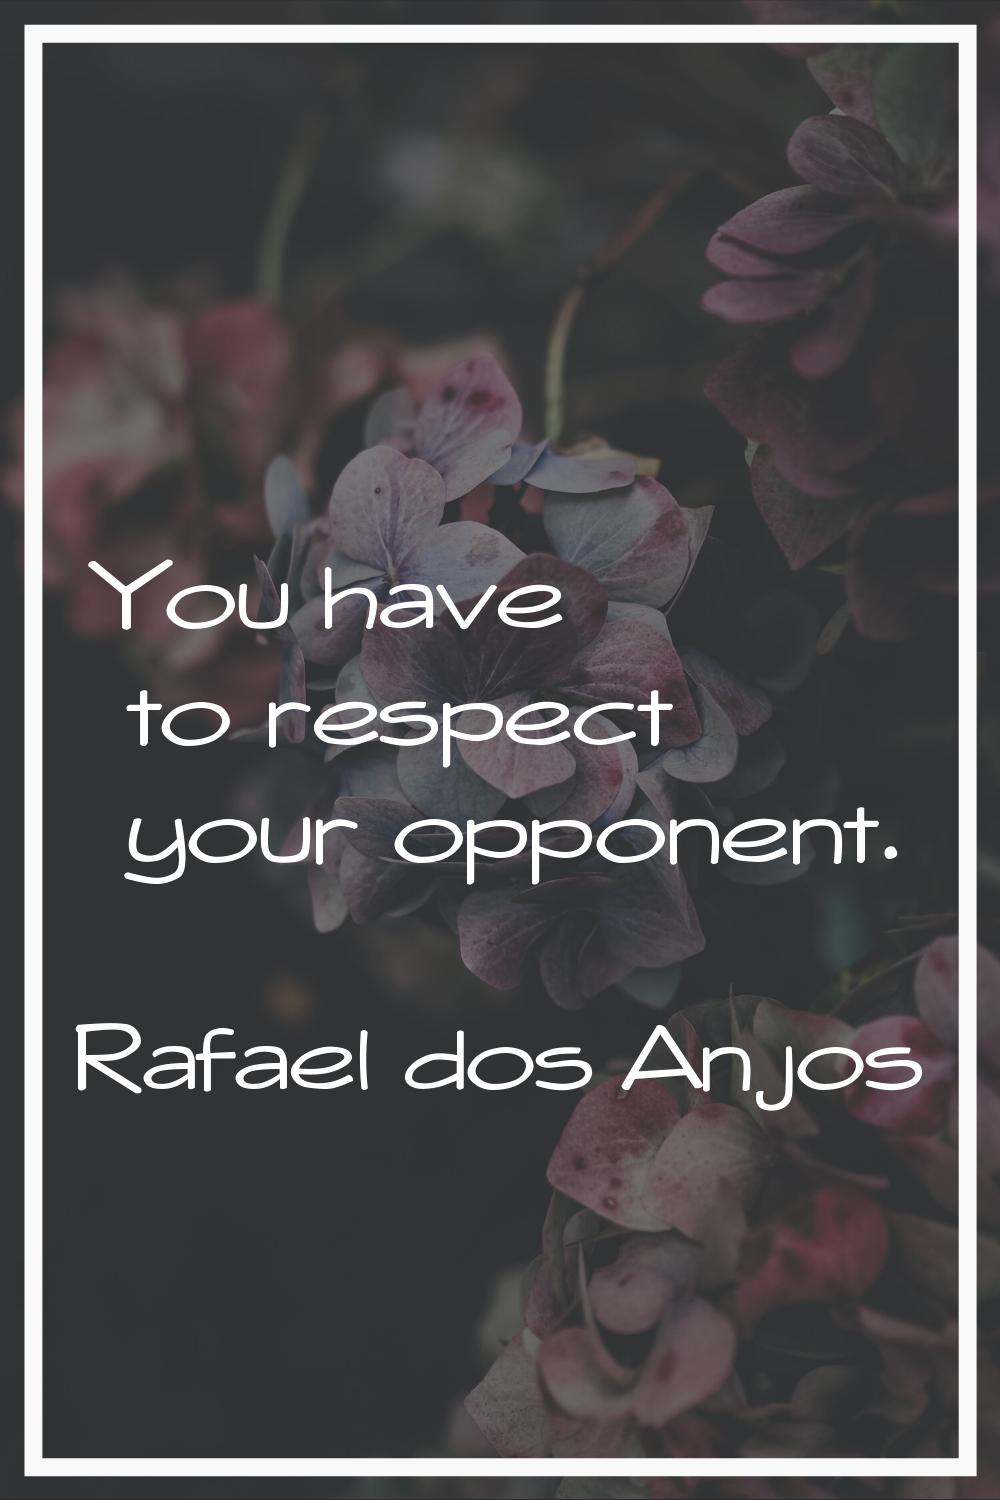 You have to respect your opponent.